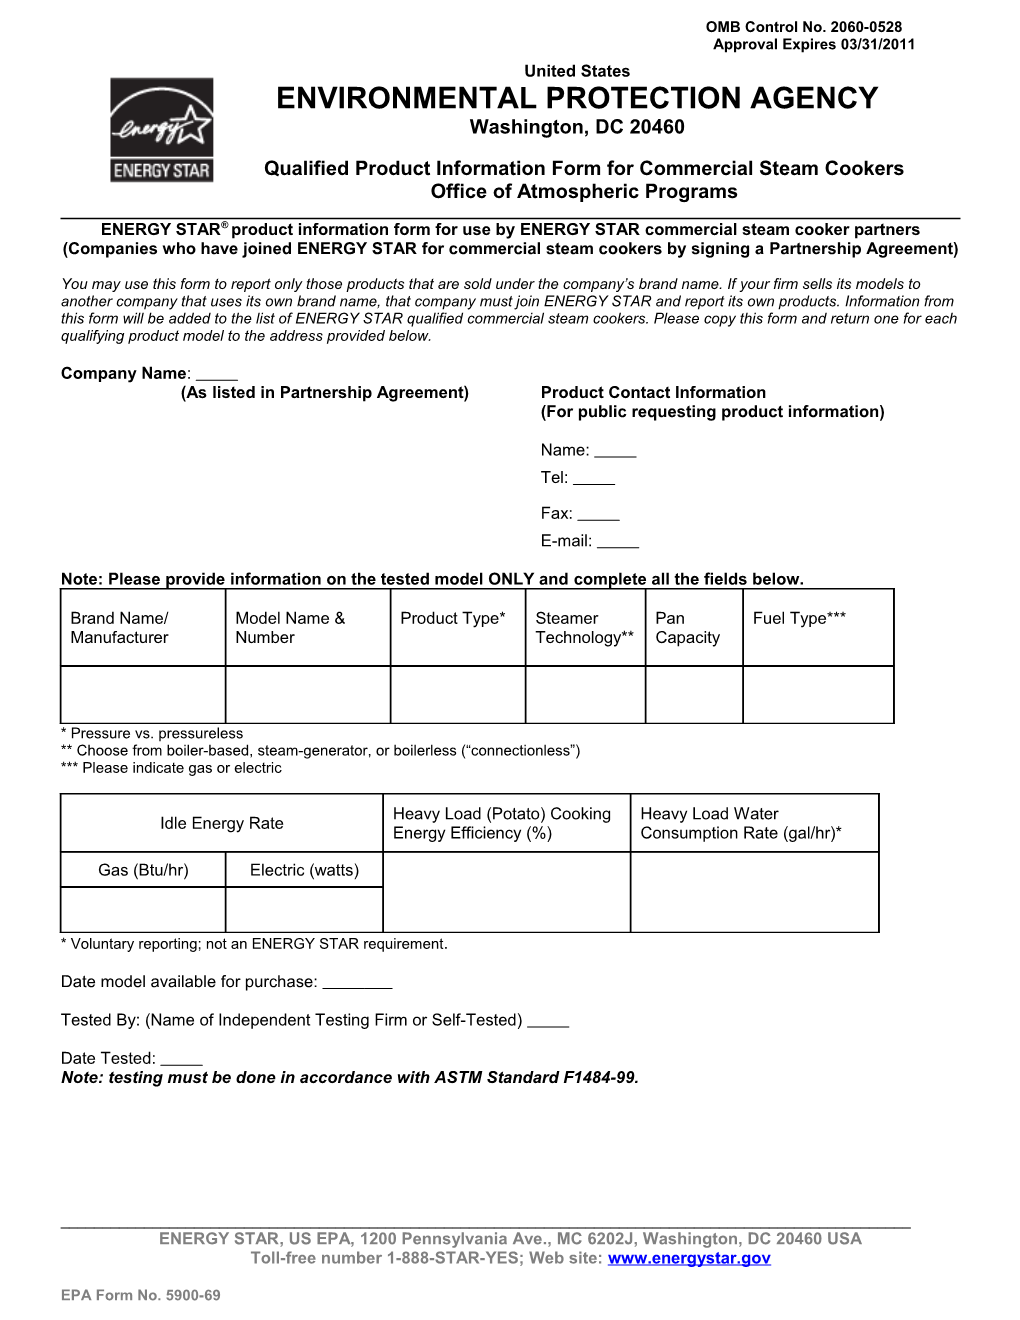 Qualified Product Information Form for Commercial Steam Cookers